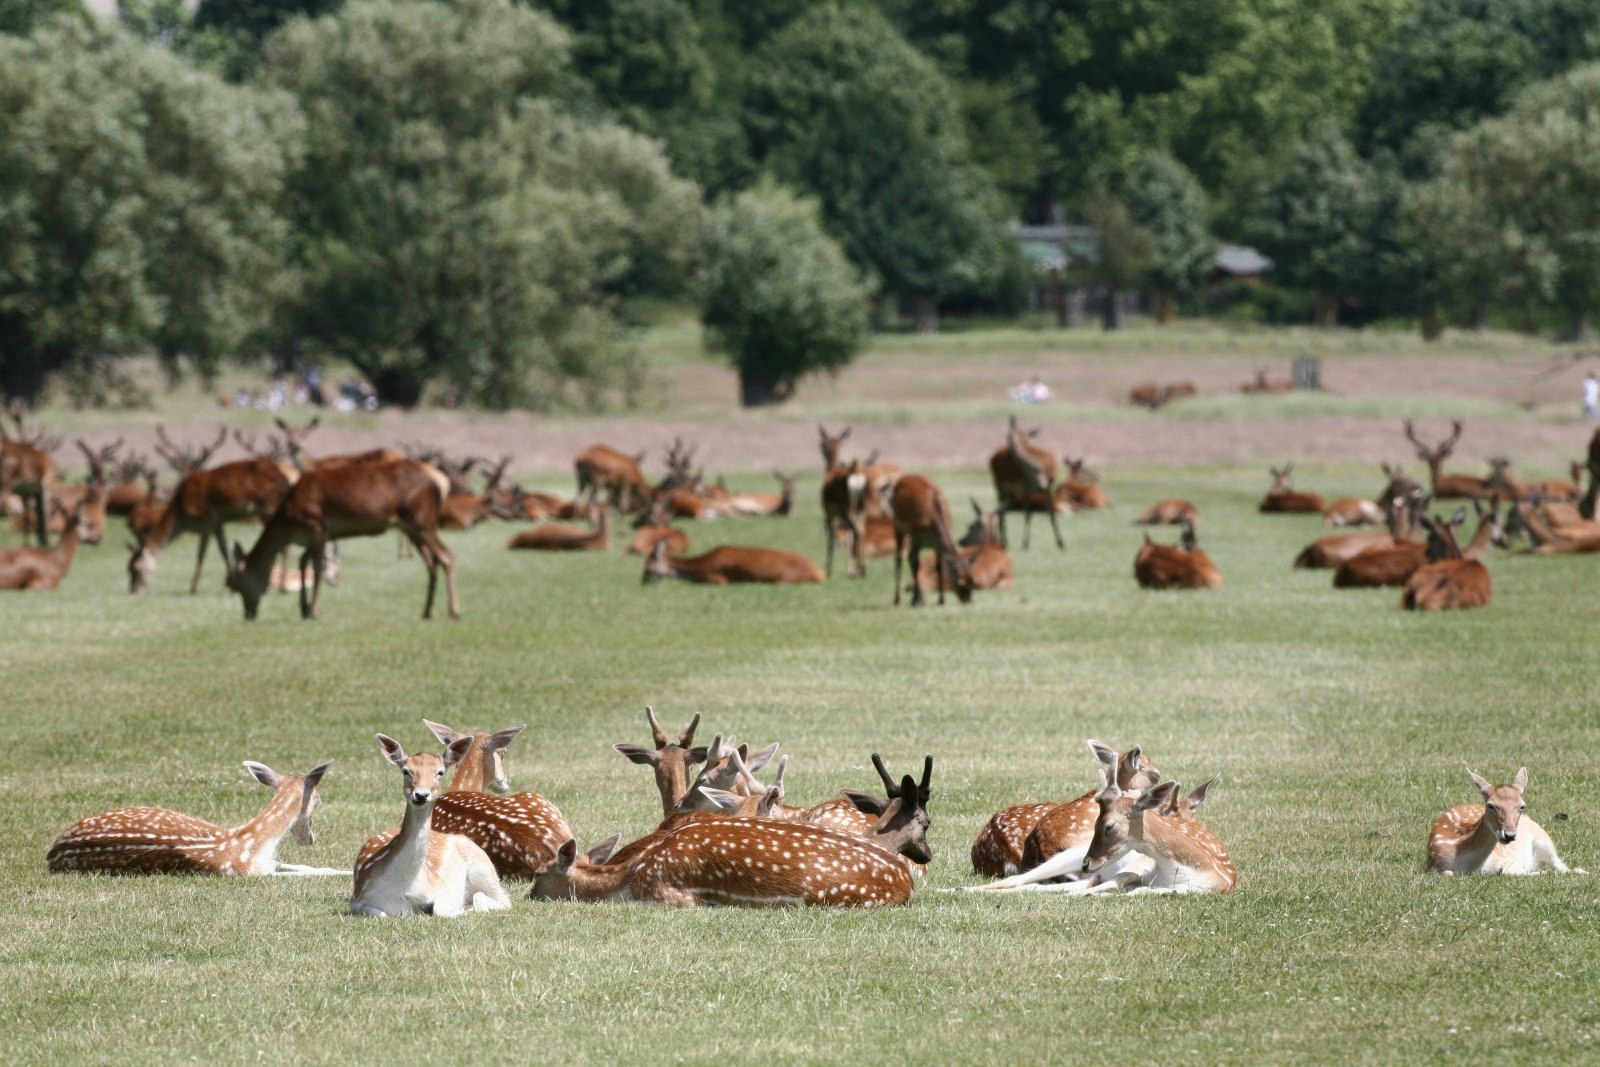 A very large group of deer can be seen resting or feeding on the grass of Richmond Park